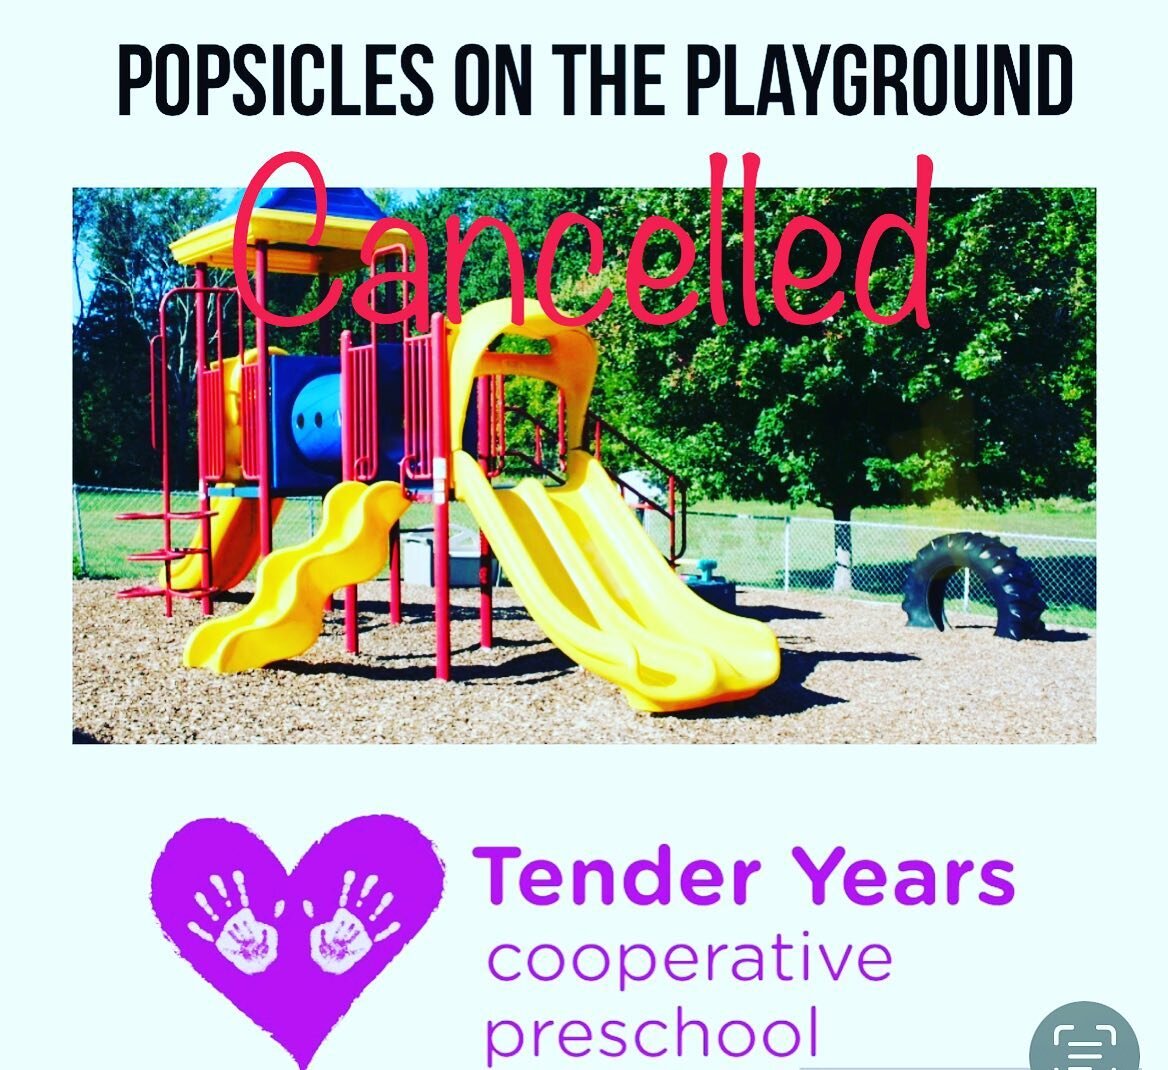 Unfortunately due to weather we will have to cancel today&rsquo;s #popsciclesontheplayground event. If you are interested in our school please reach out and we can get a tour scheduled. Our next event will be 8/6 from 10-12. Stay dry everyone 💜💜